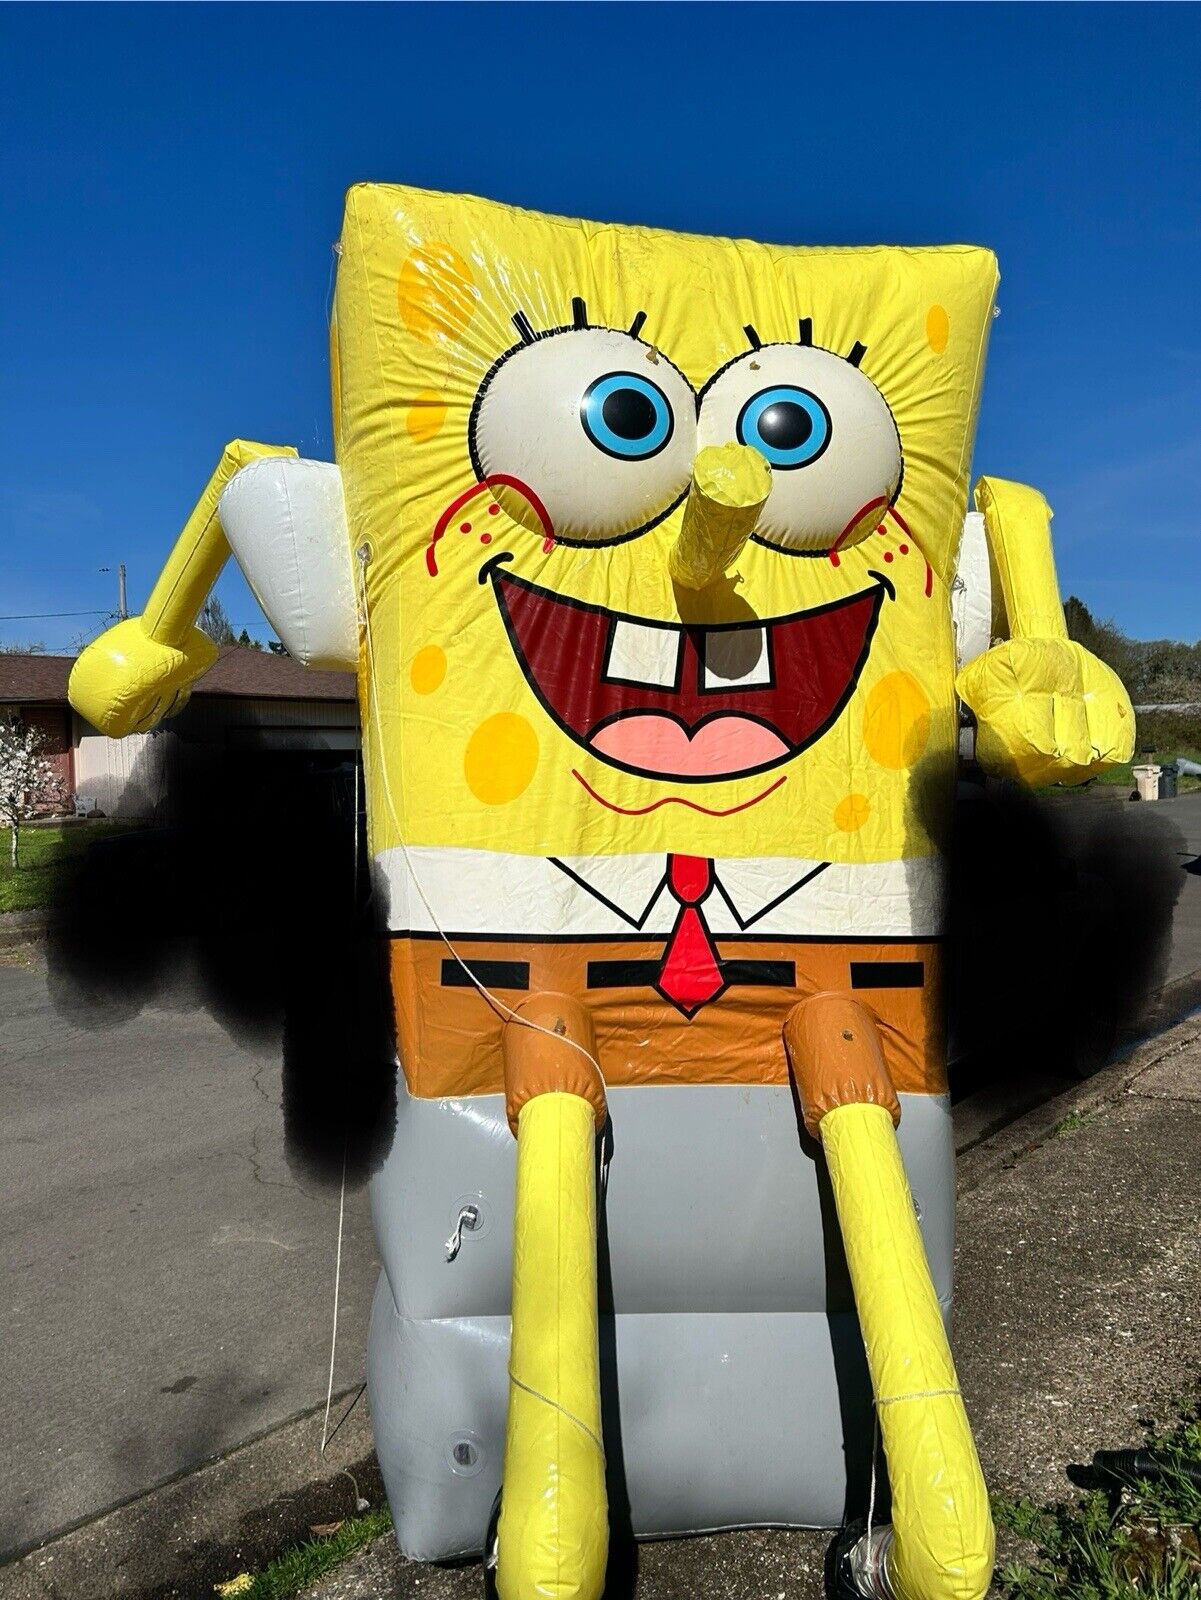 EXTREMELY RARE  Spongebob Squarepants 2004 Burger King 9' Rooftop Inflatable 